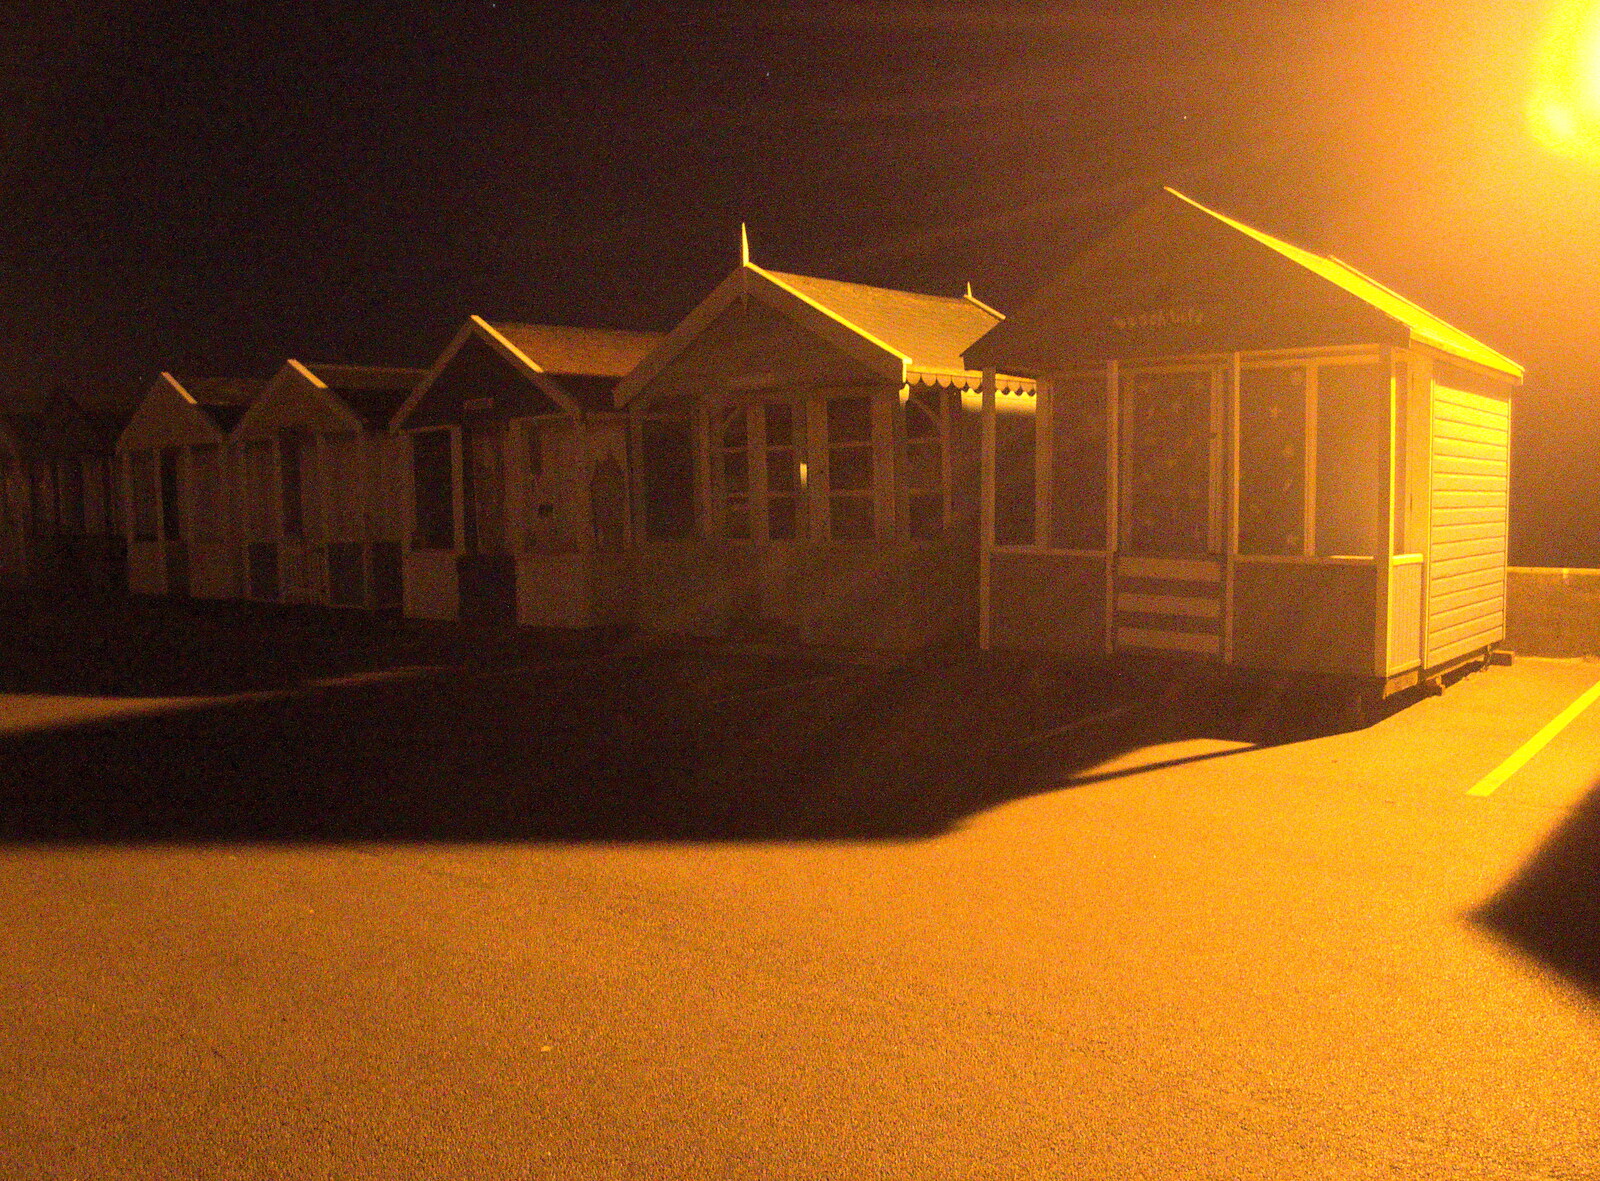 Sodium beach huts from Southwold Seaside Pier, Southwold, Suffolk - 18th December 2016